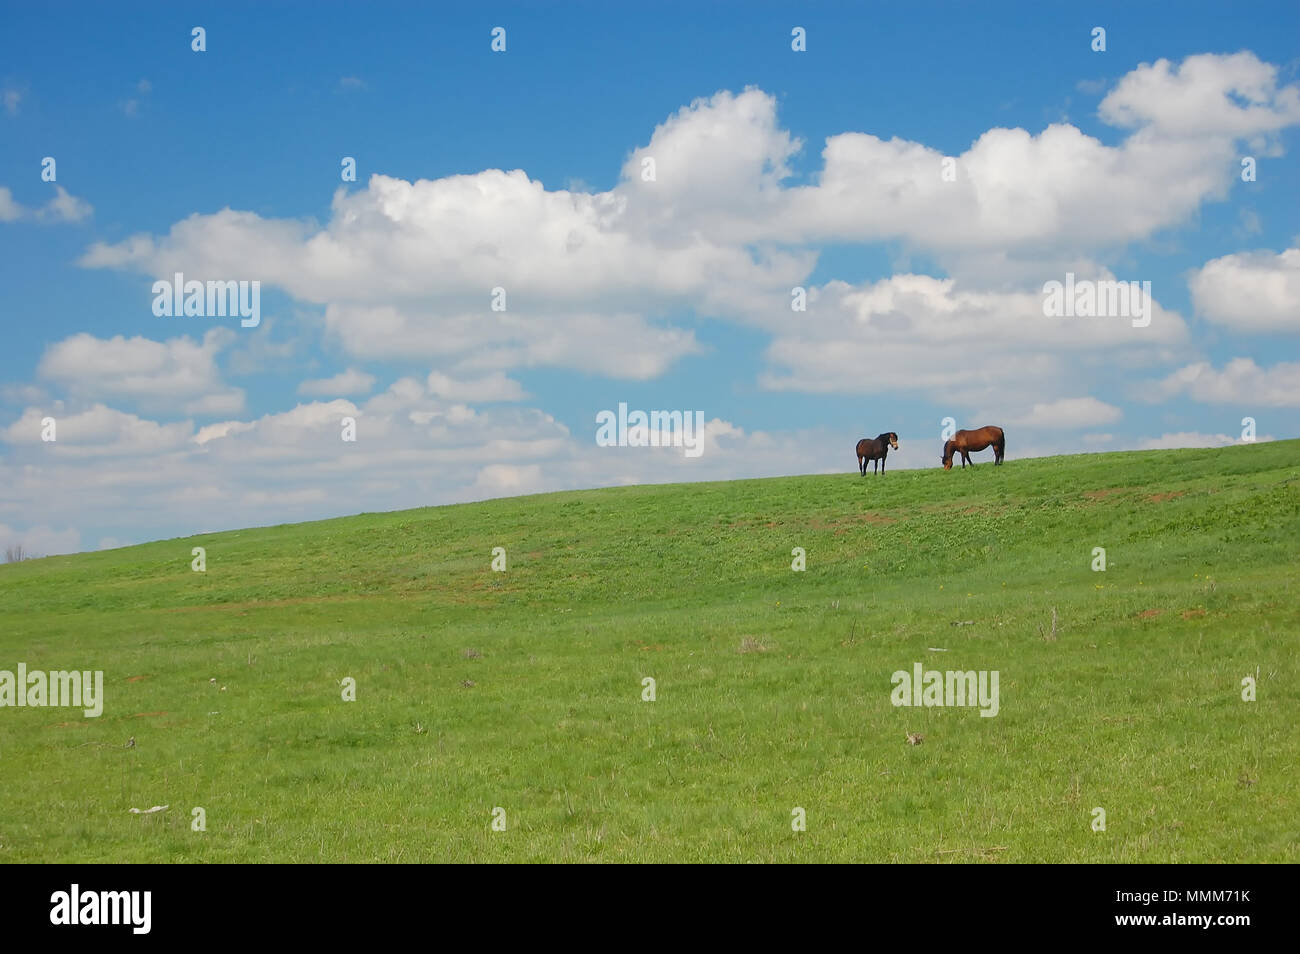 Blue sky, white clouds and a green lawn with two brown horses; a peaceful day in the countryside. Stock Photo